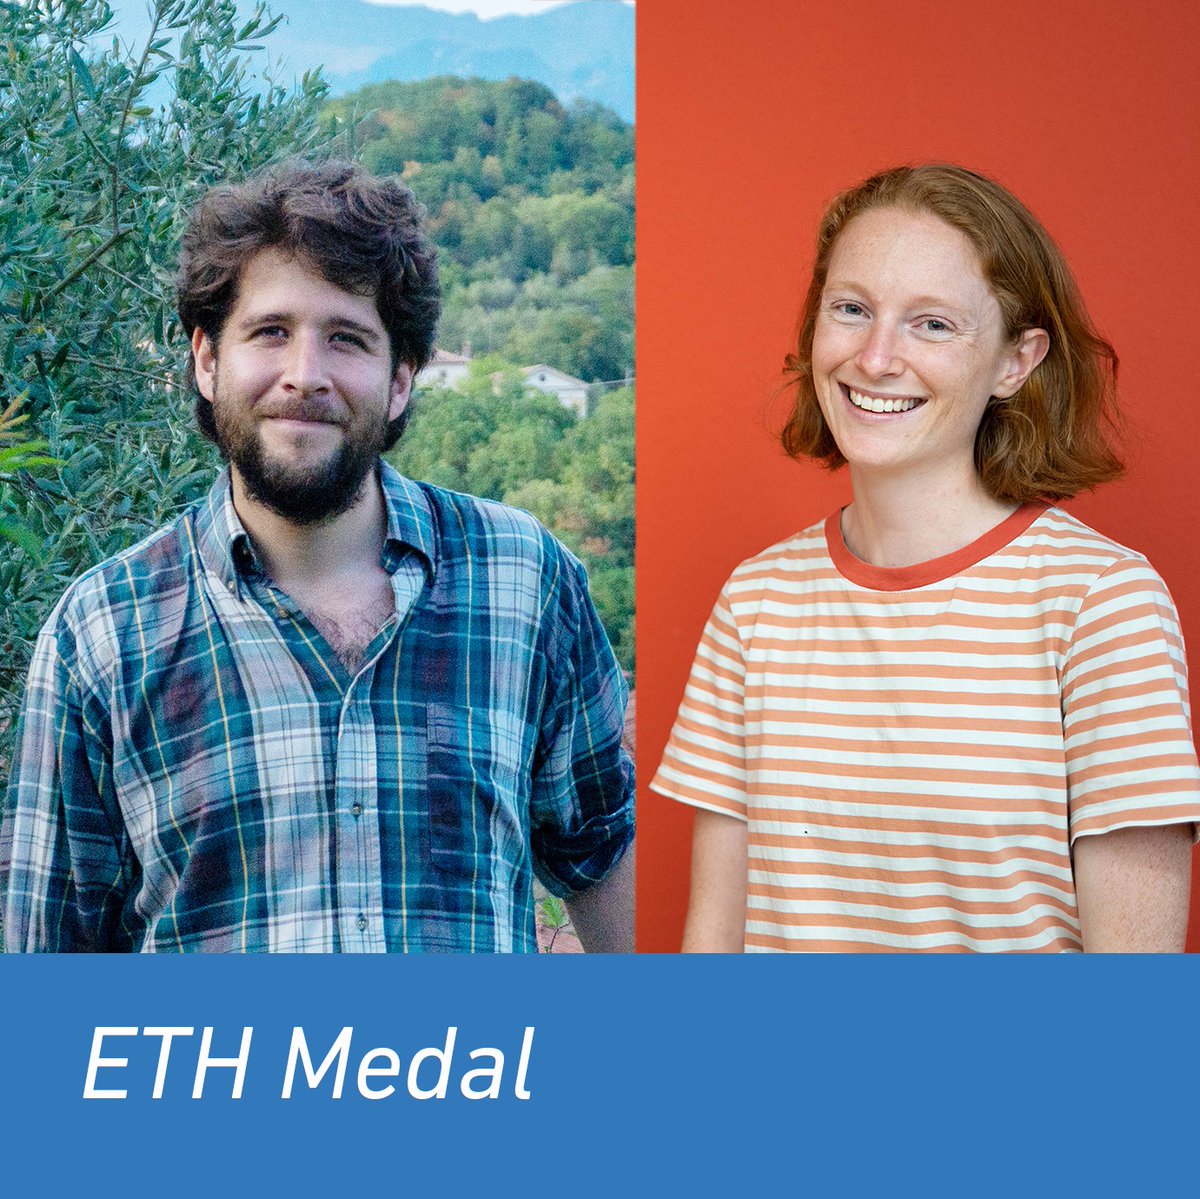 Congratulations to Sarah Nadeau @TanjaStadler_CH and Joaquin Gutierrez @KhammashLab on receiving the #ETHmedal for their excellent doctoral theses on advancing pathogen phylogenies for public health and developing a bacterial growth platform > u.ethz.ch/tHJvb+ @ETH_en